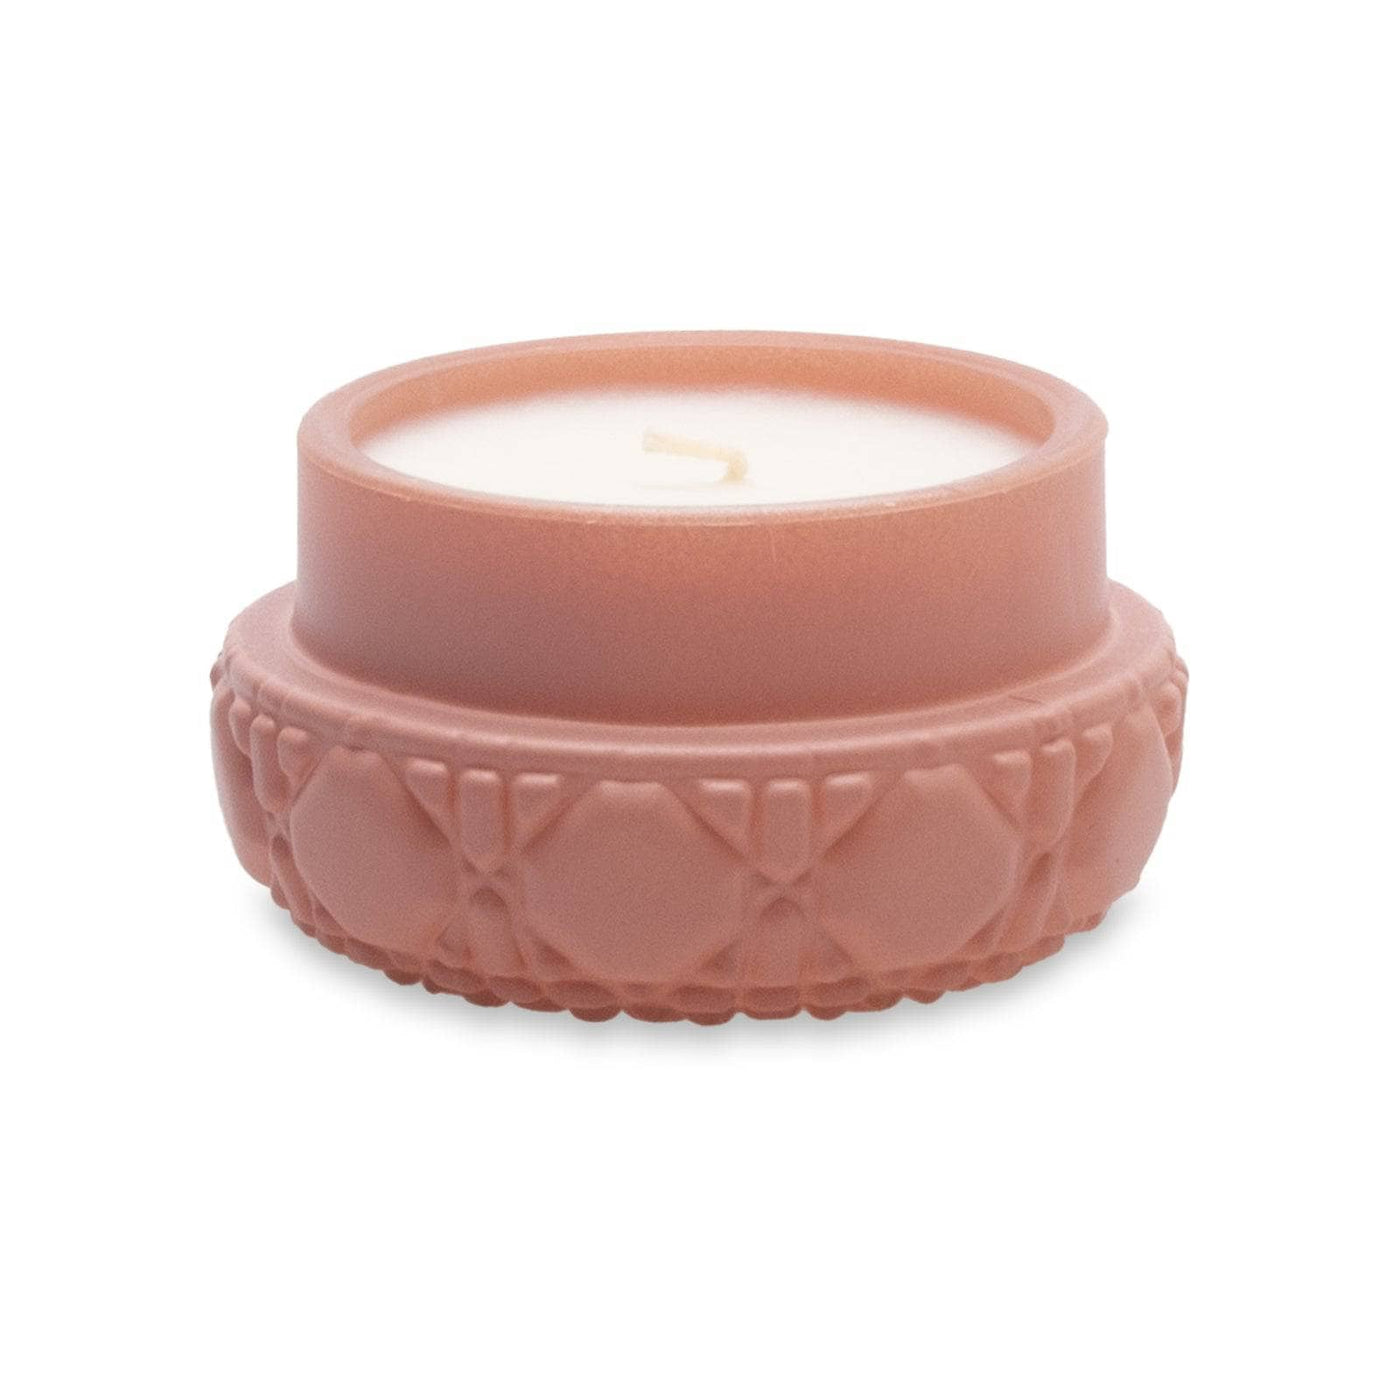 Uplift Mini Soy Wax Candle, Pink, 50 g Candles sazy.com